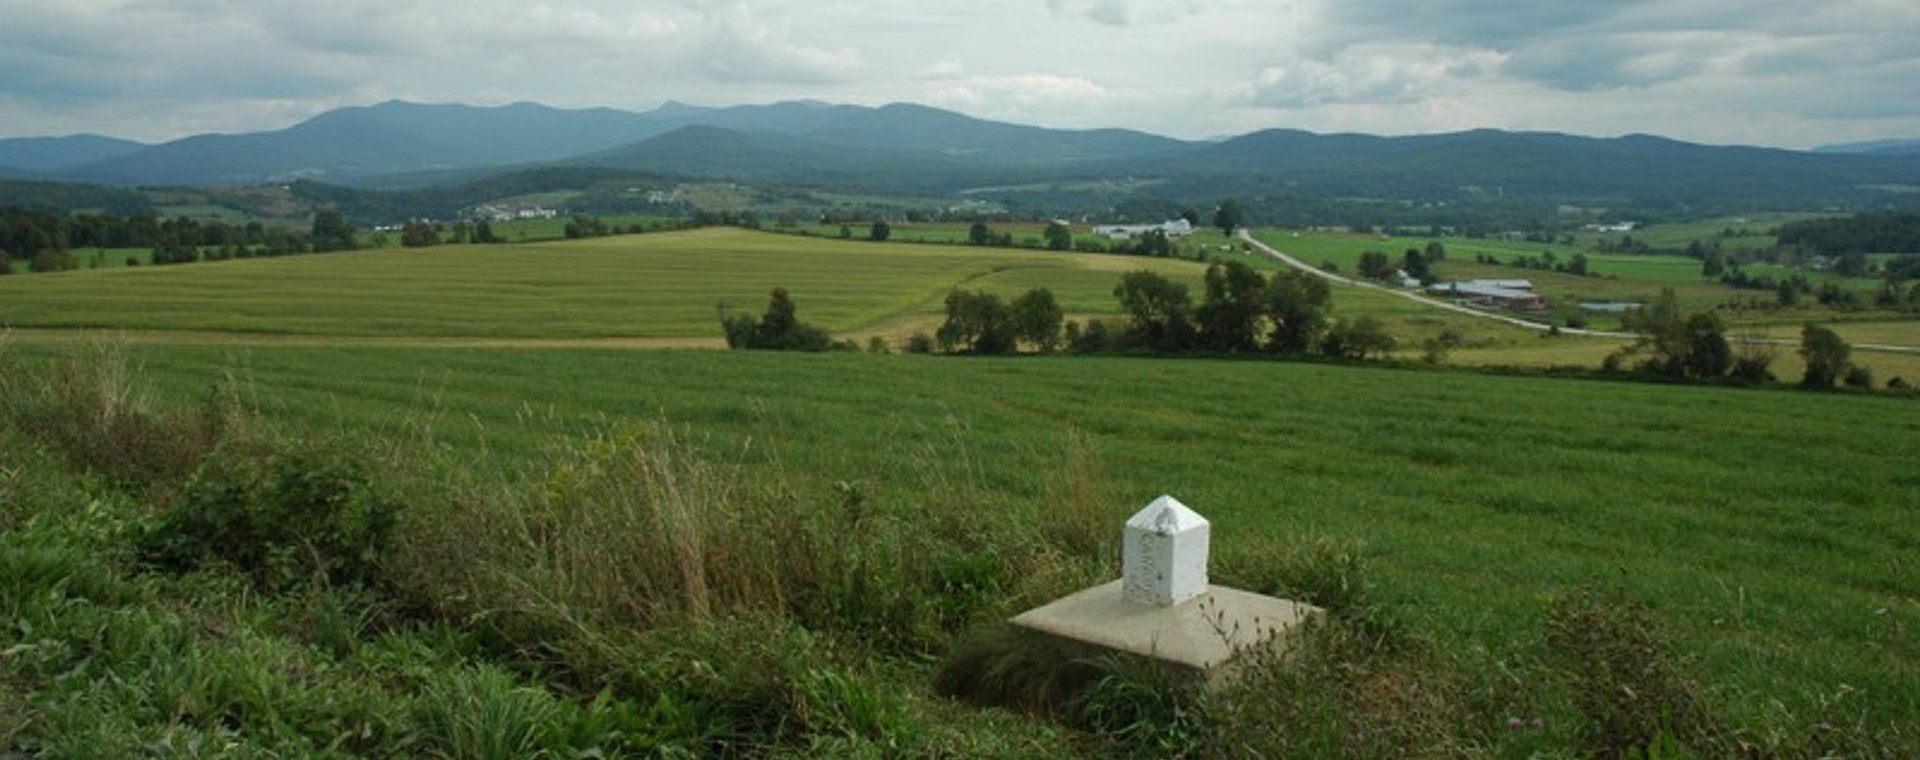 In the middle of a leafy field at the foot of the mountains, a small white marker indicates the Canada-U.S. border.